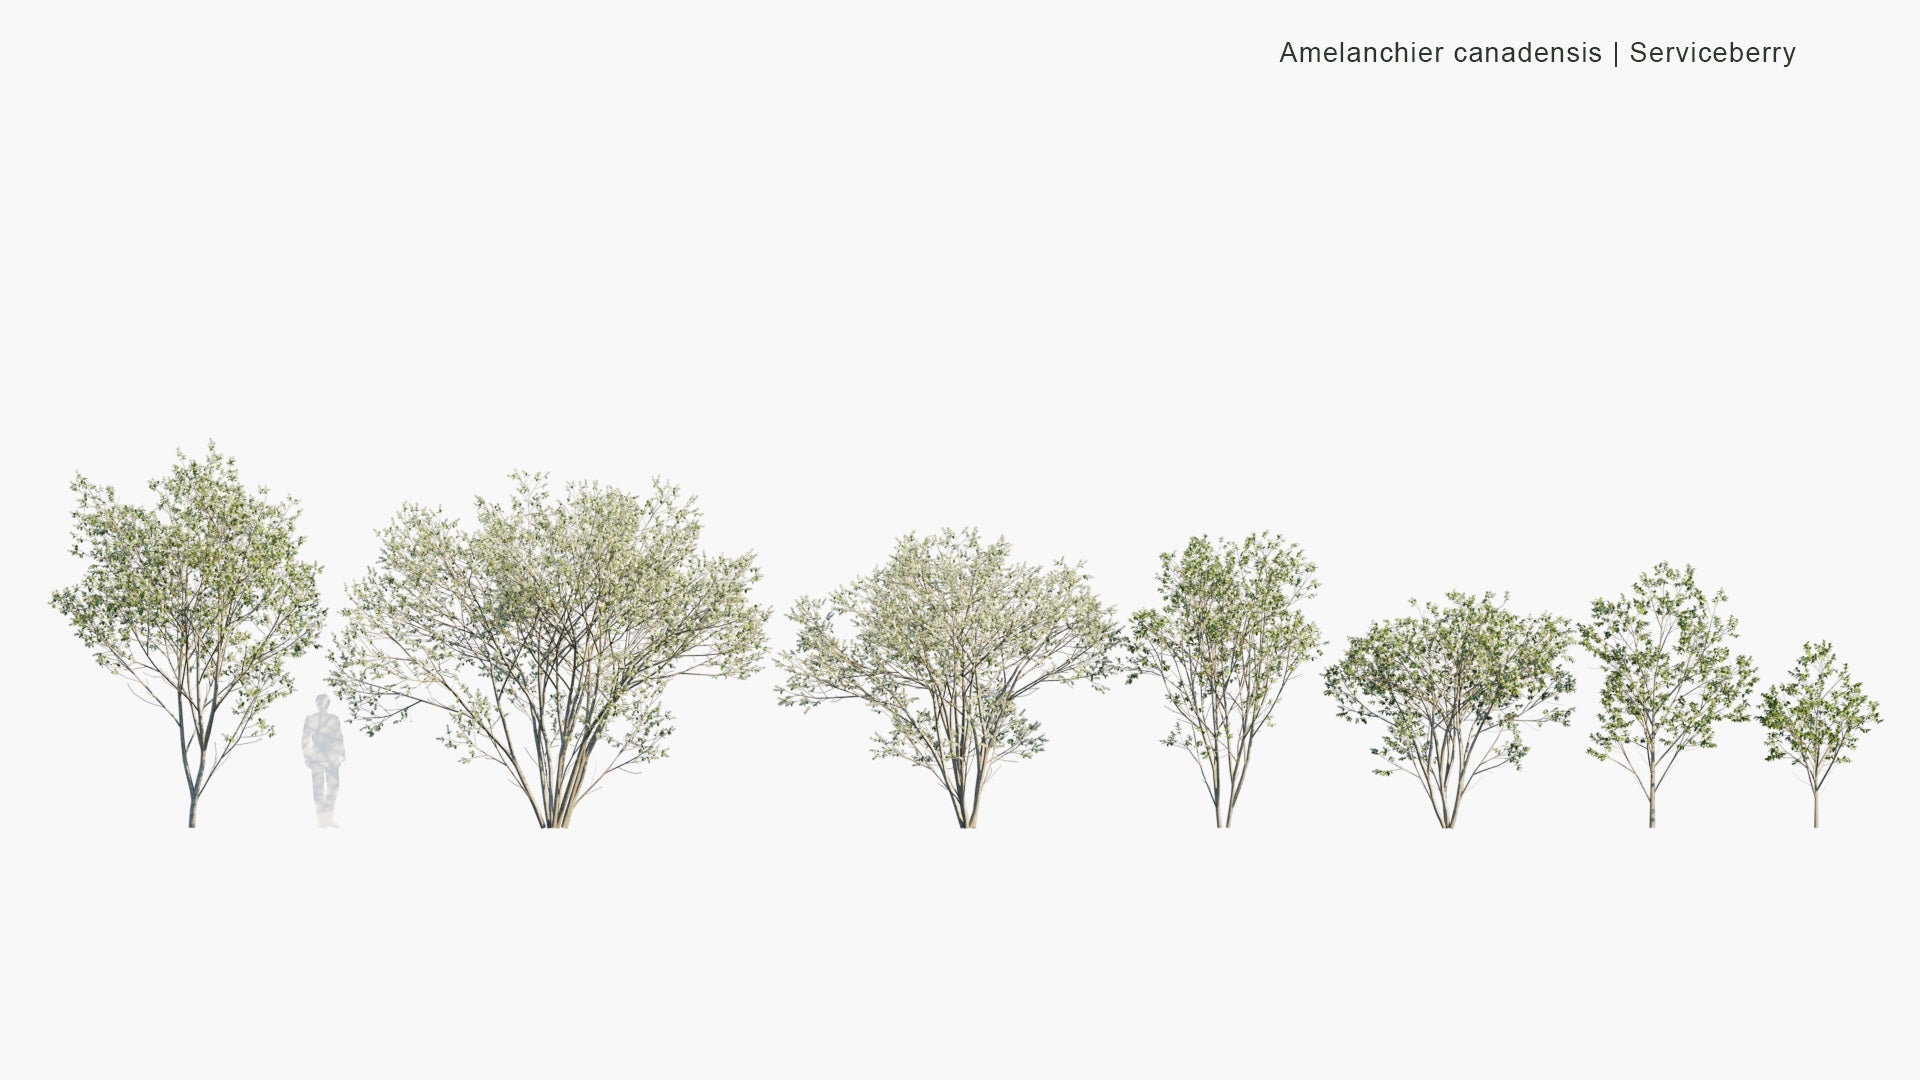 Low Poly Amelanchier Canadensis - Canadian Serviceberry, Chuckle-Berry, Currant-Tree, Juneberry, Shad-Blow Serviceberry, Shad-Blow, Shadbush, Shadbush Serviceberry, Sugarplum, Thicket Serviceberry (3D Model)